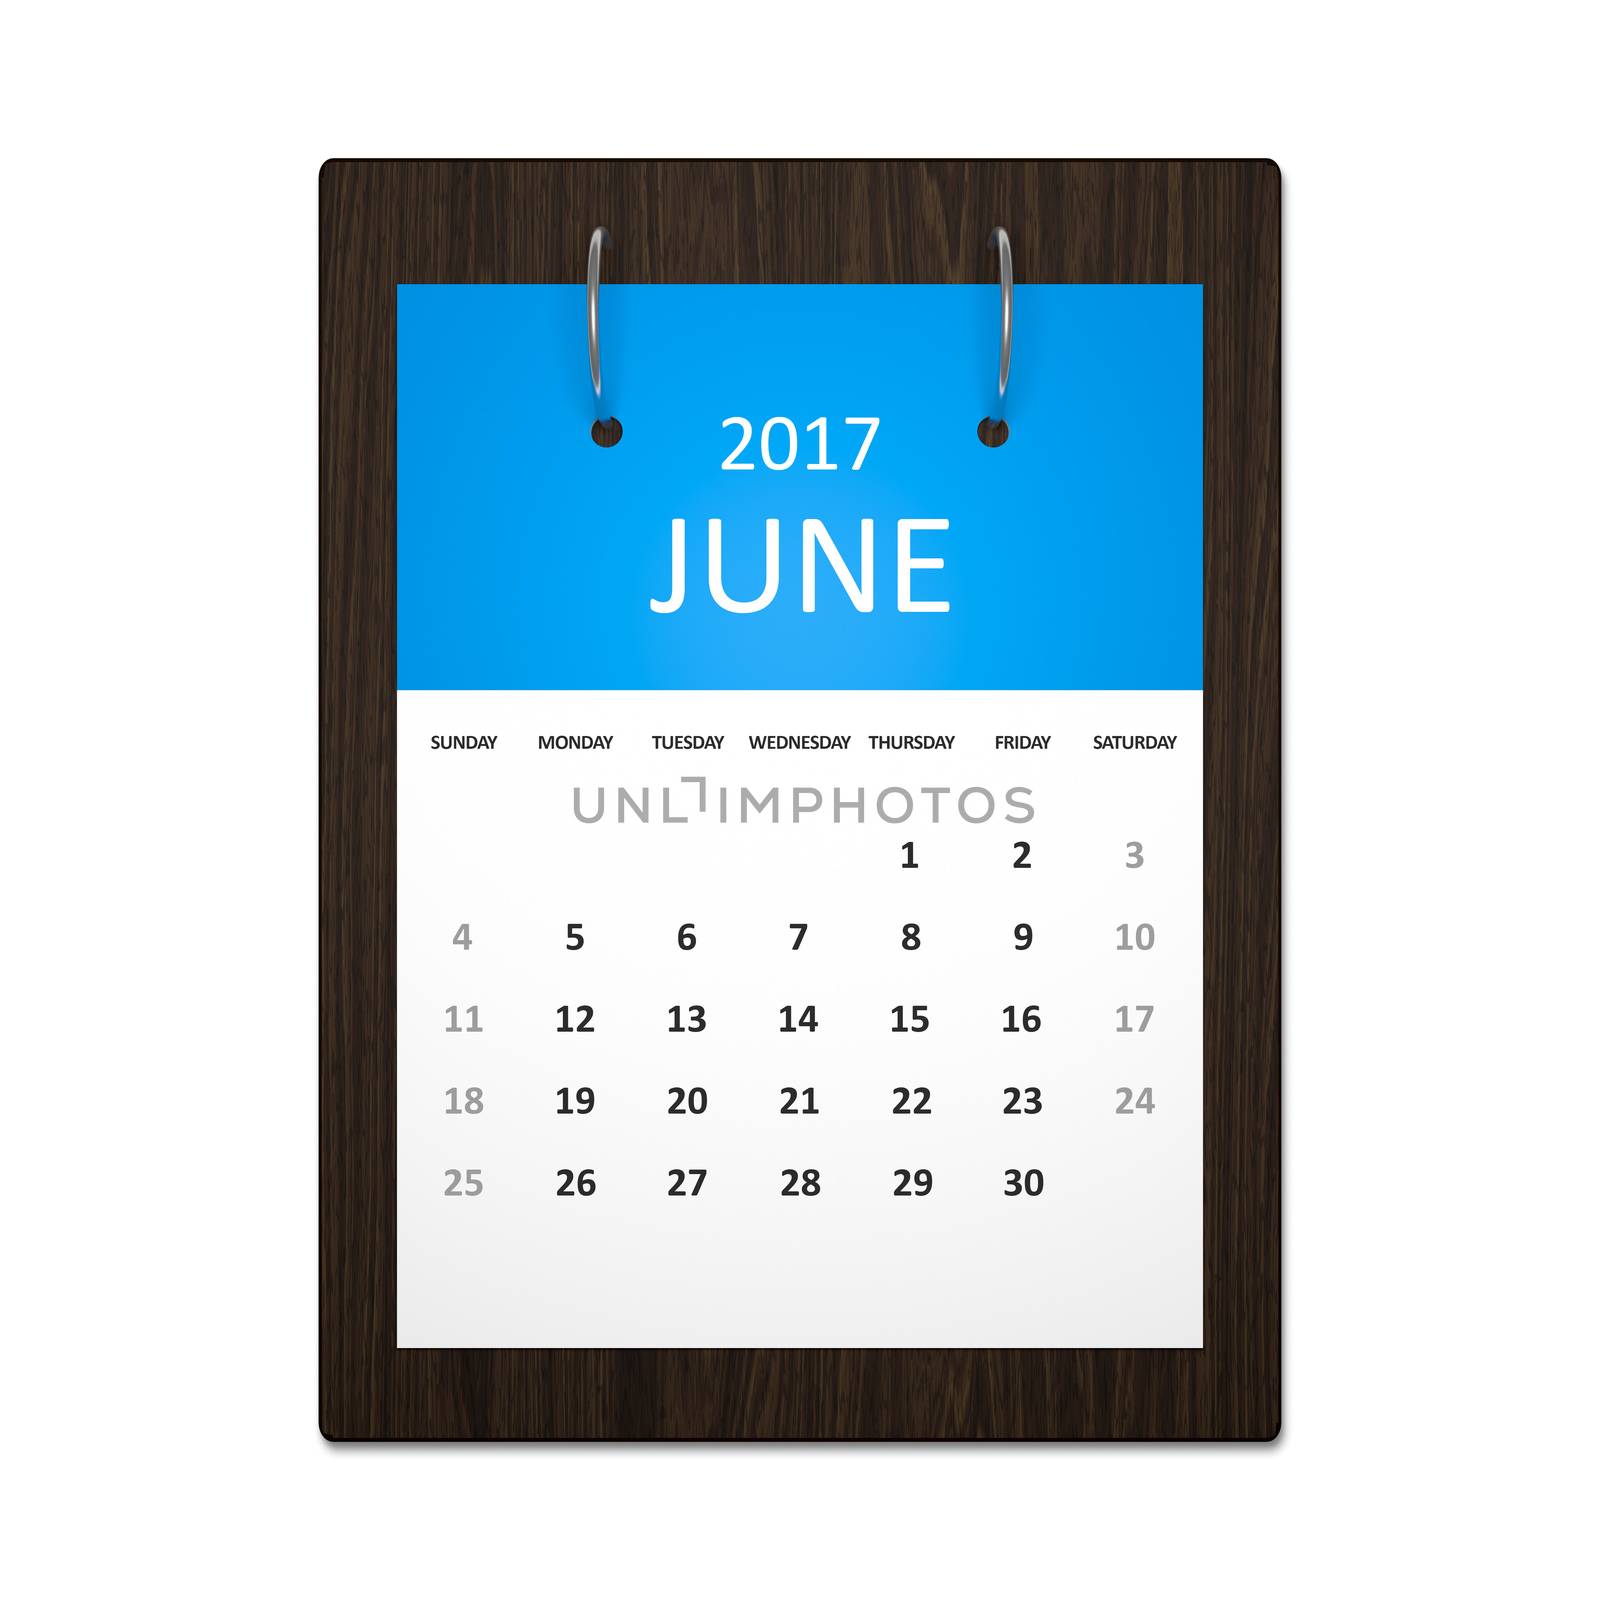 An image of a stylish calendar for event planning 2017 june